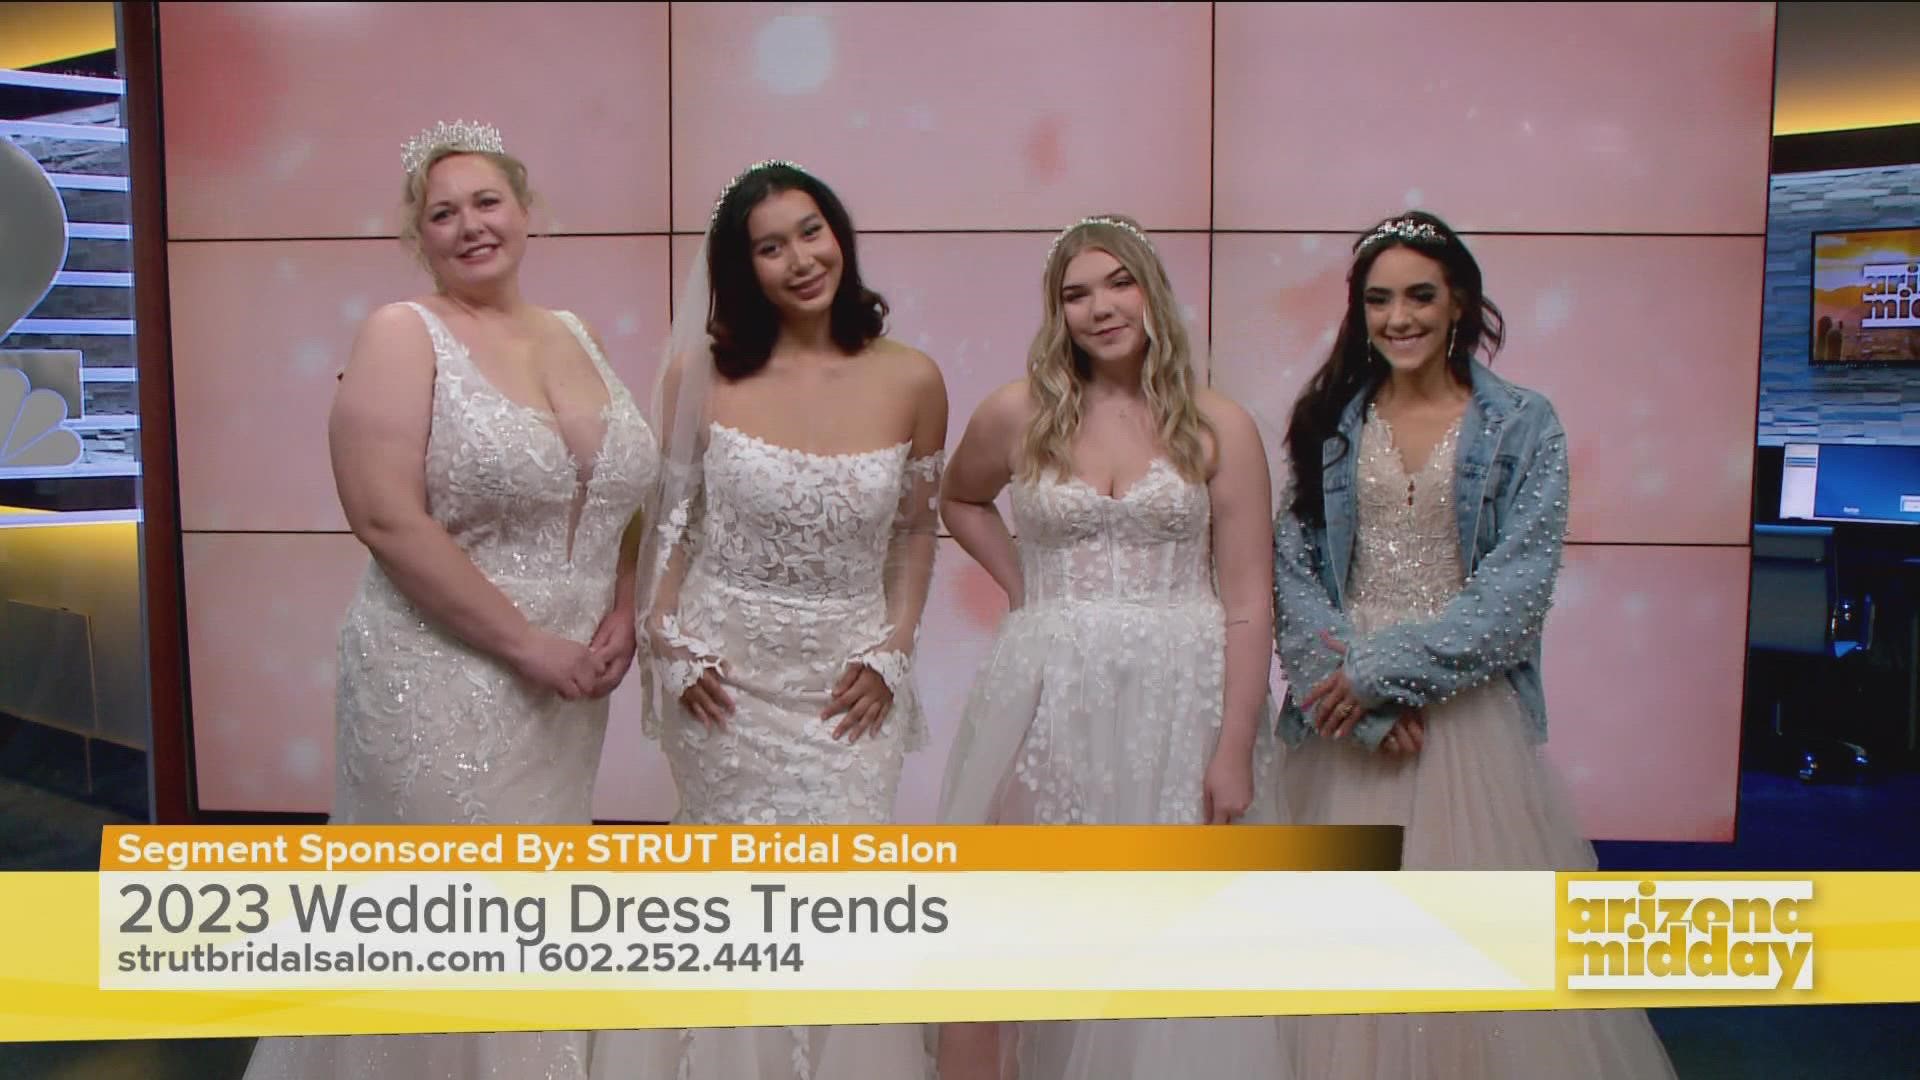 Ann Campeau, owner of STRUT Bridal Salon, breaks down the hottest styles for 2023 bridal fashion - dresses, customized jackets and more!